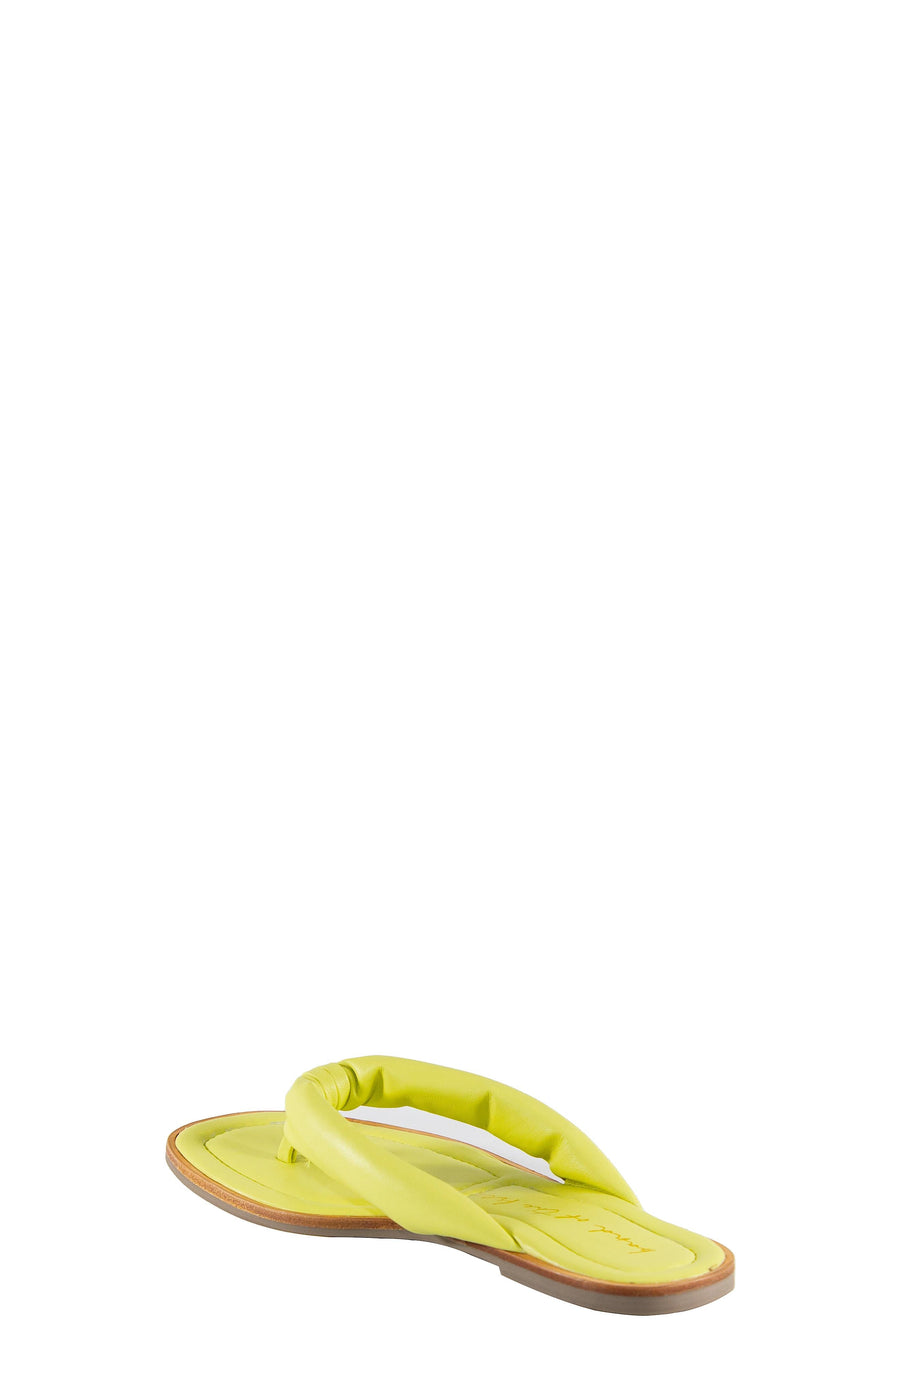 Solana Lime Leather Padded Flip Flop